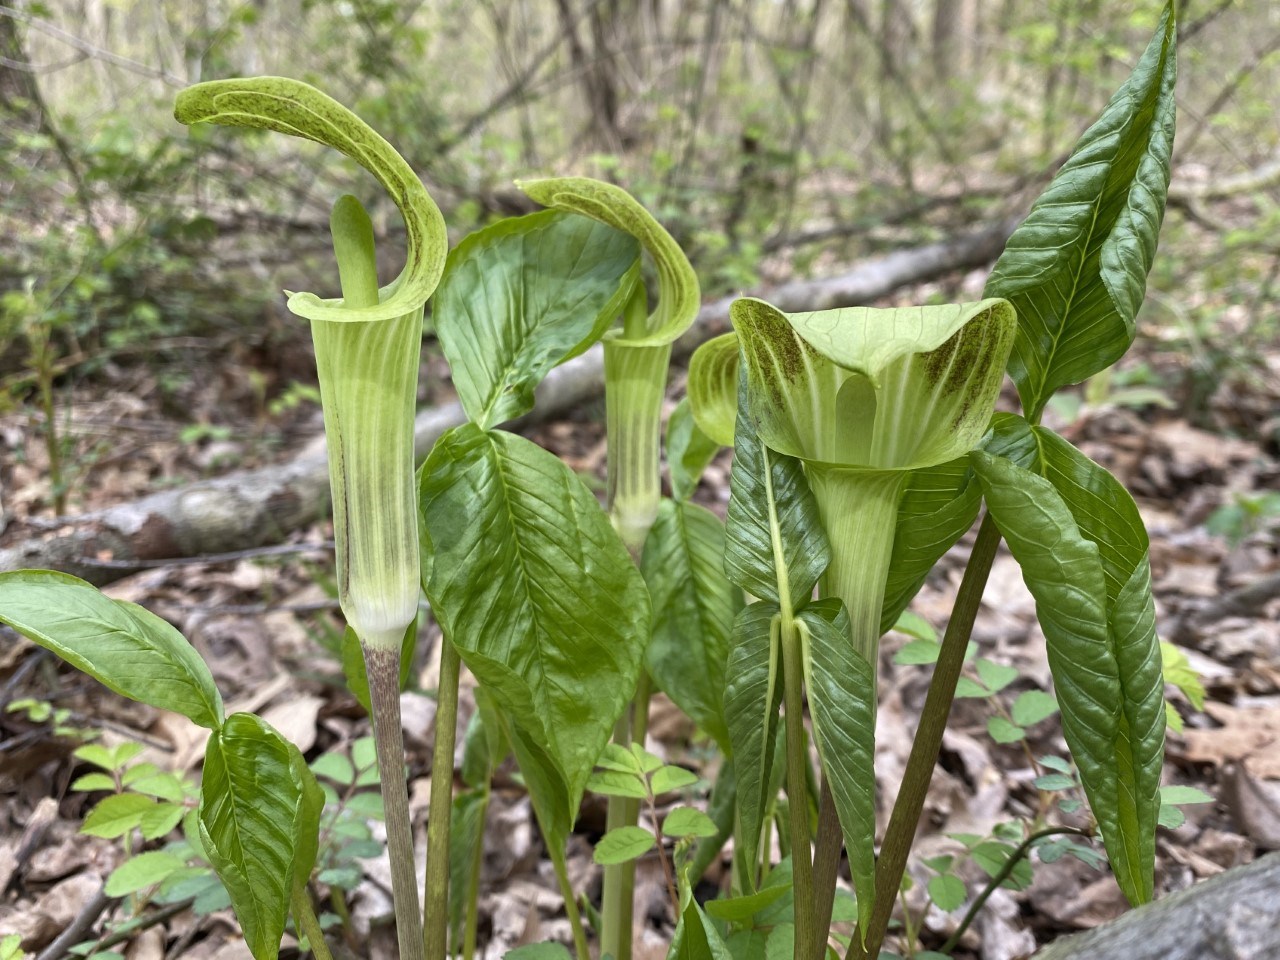 A jack-in-the-pulpit plant on a leafy forest floor with four blooms and various shades of green